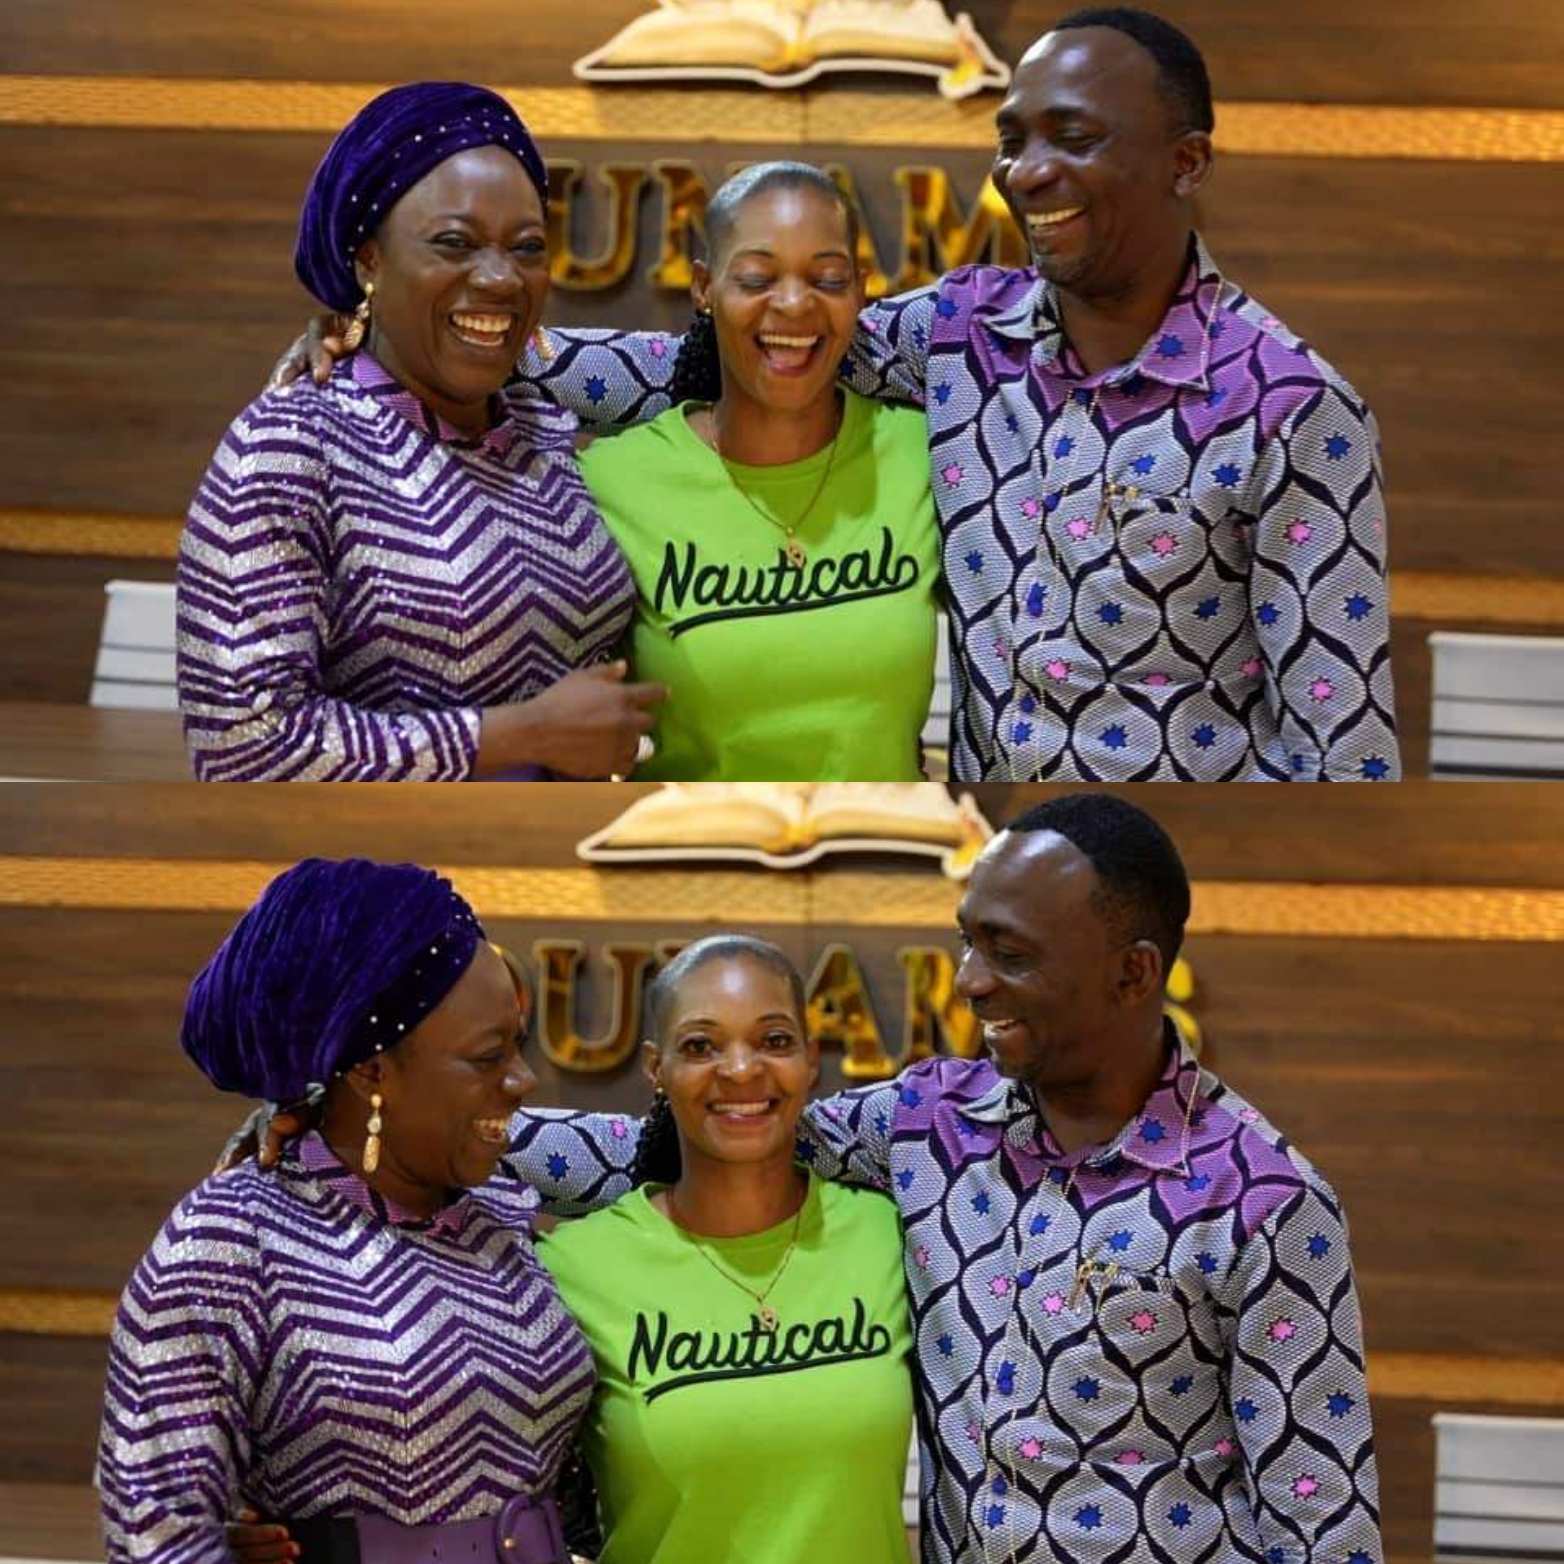 Pastor Paul Enenche apologizes to Woman who he shamed in church.